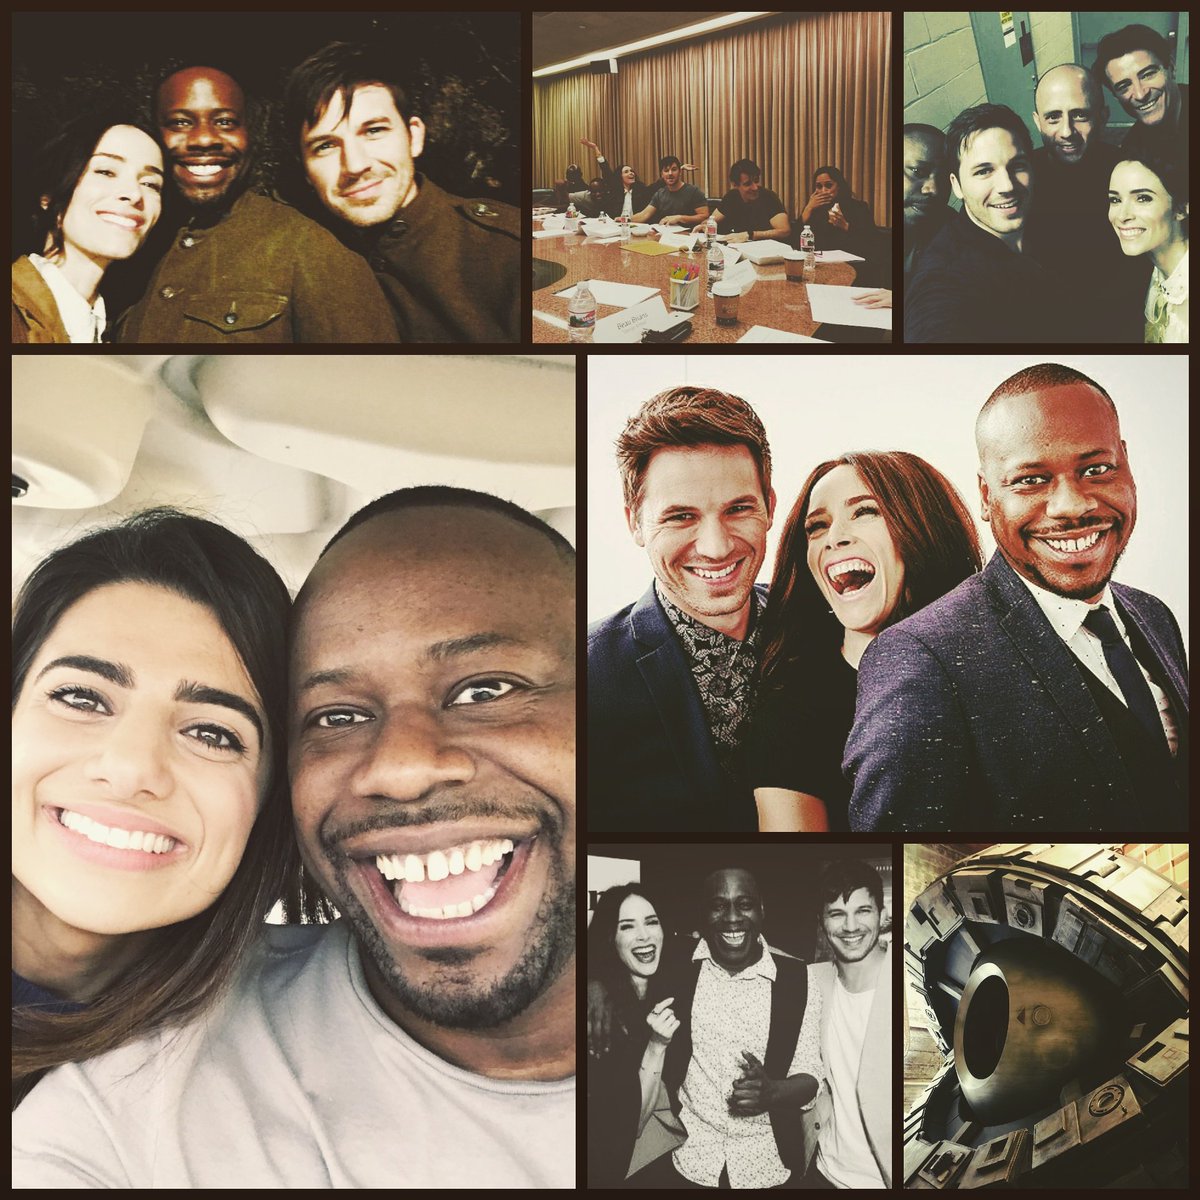 HAPPY THANKSGIVING EVERYONE!! I am incredibly #thankful for our amazing #Timeless family!!! I love you guys so much and thank you so much for sharing your talent with us fans! #TimeTeam  #nbc #bts
@nbctimeless @abigailspencer @mattlanter @verbalberappin @claudiadoumit @sakinajaff